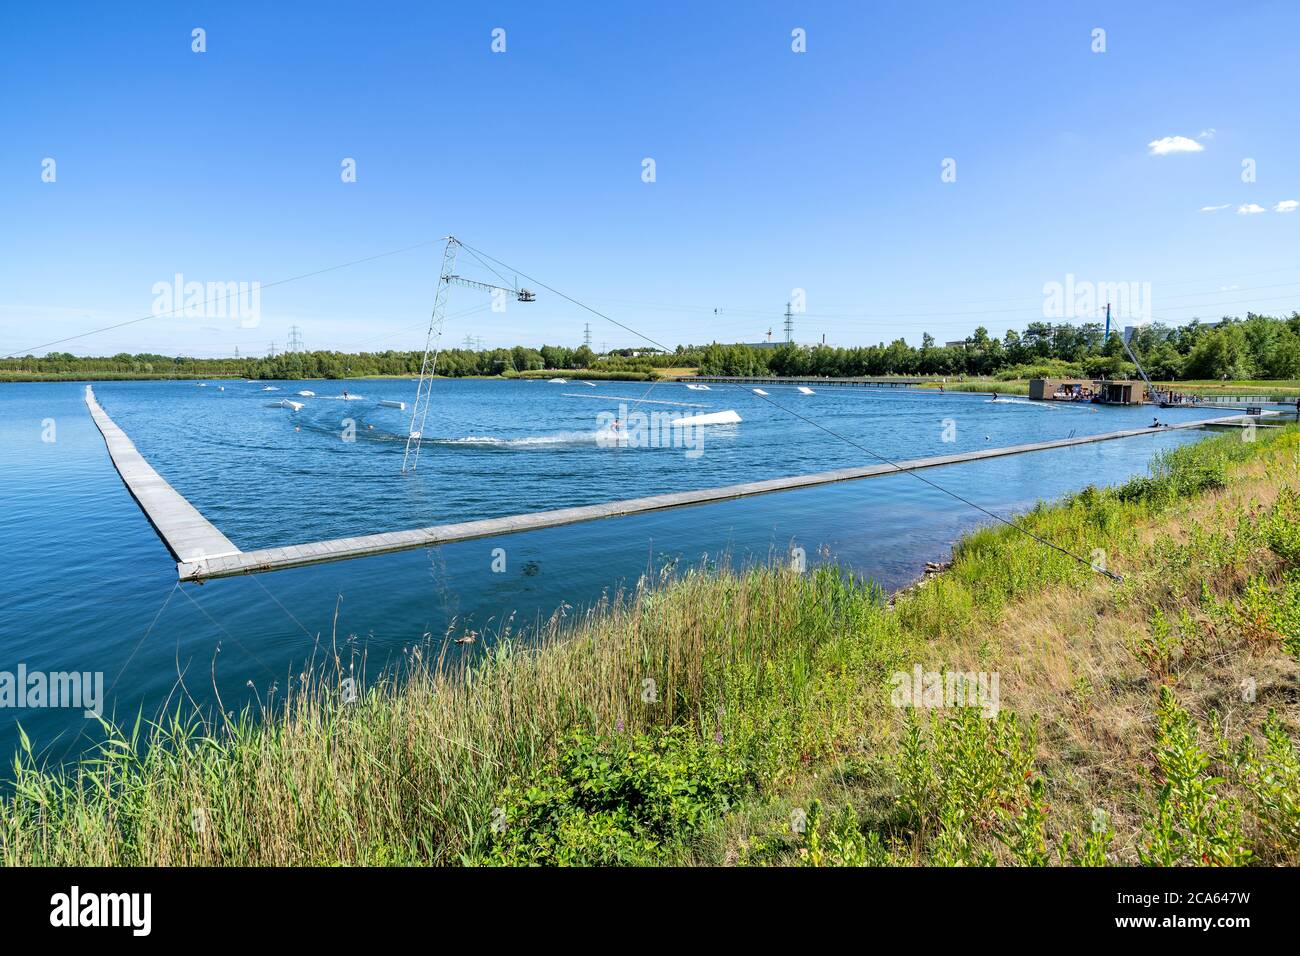 cable ski course in the municipal park of Norderstedt, Germany Stock Photo